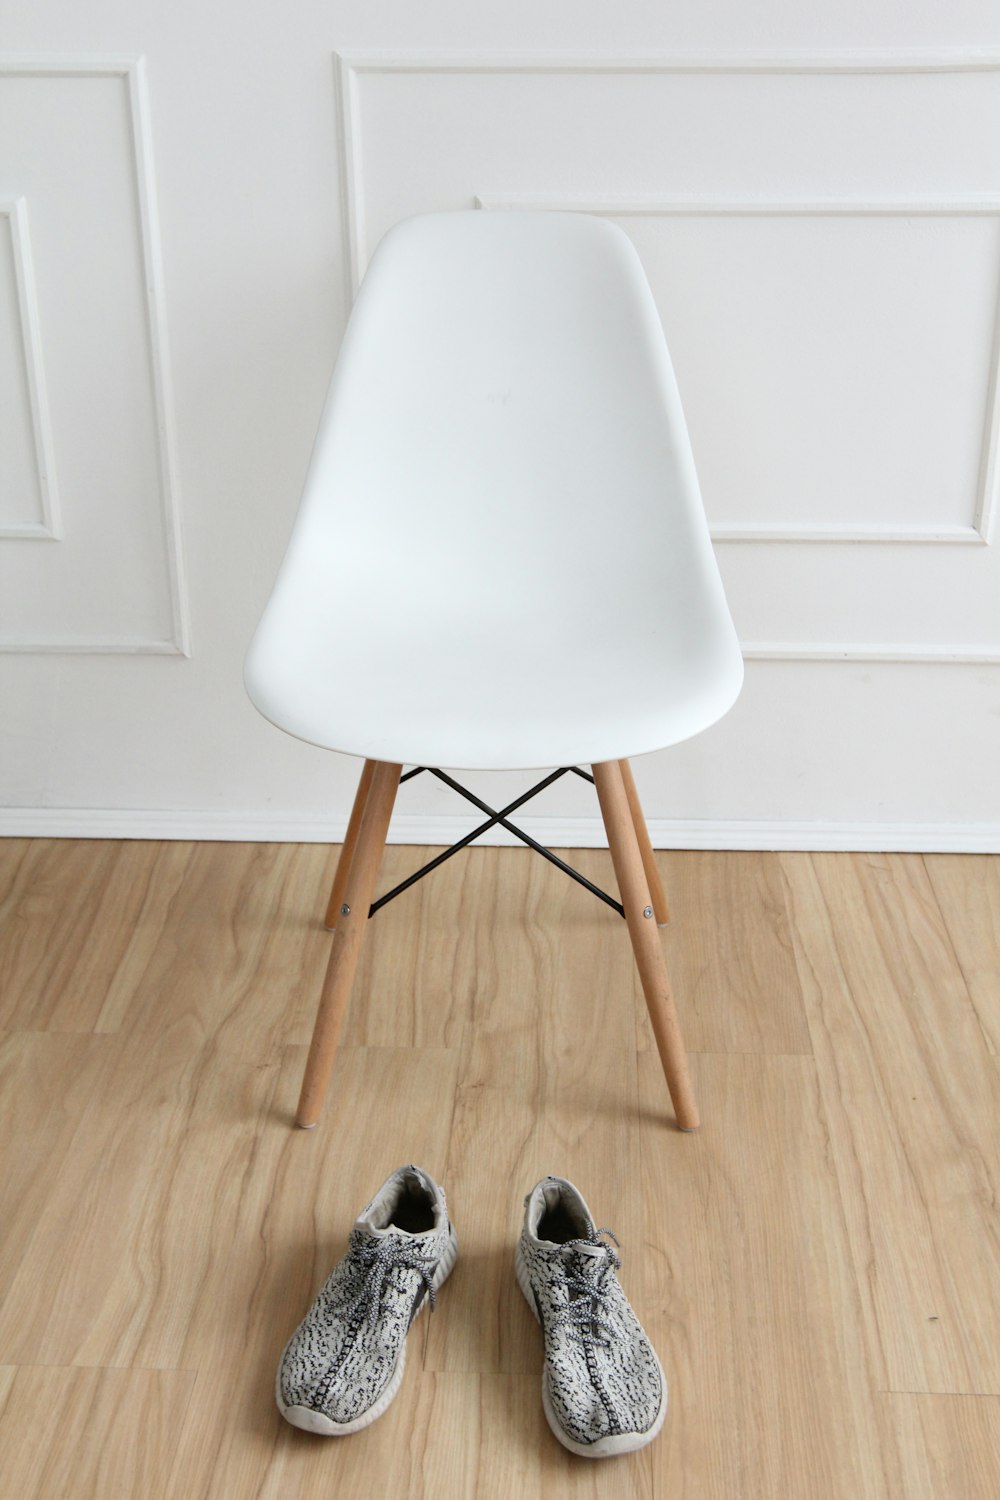 white and brown chair by wall and pair of shoes